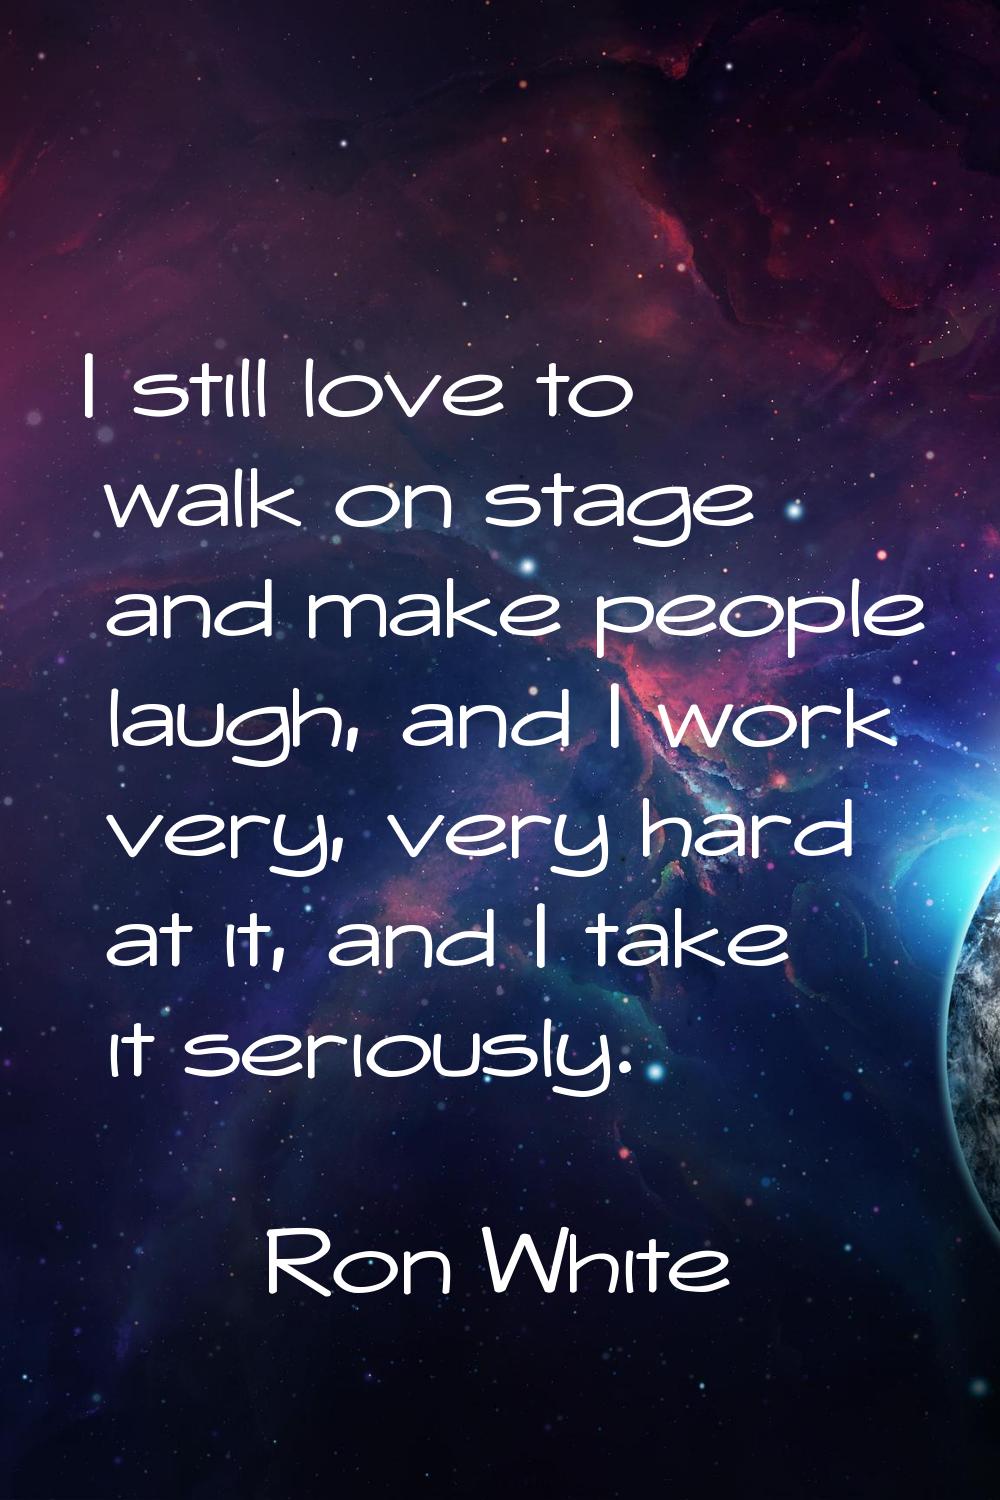 I still love to walk on stage and make people laugh, and I work very, very hard at it, and I take i